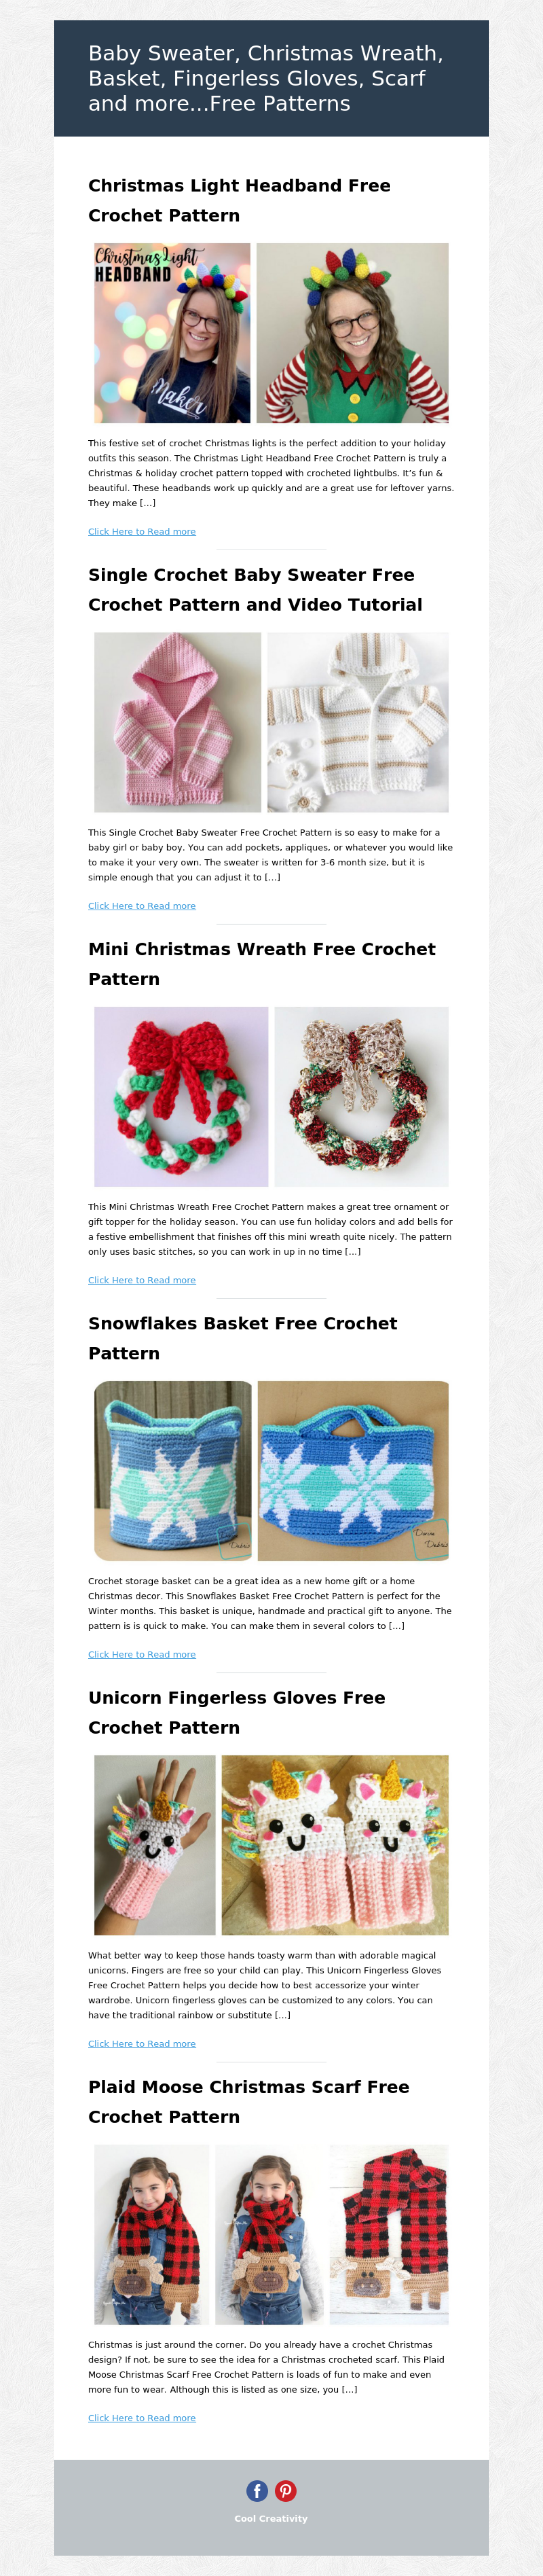 Cool Creativity - Christmas example - Made with MailerLite